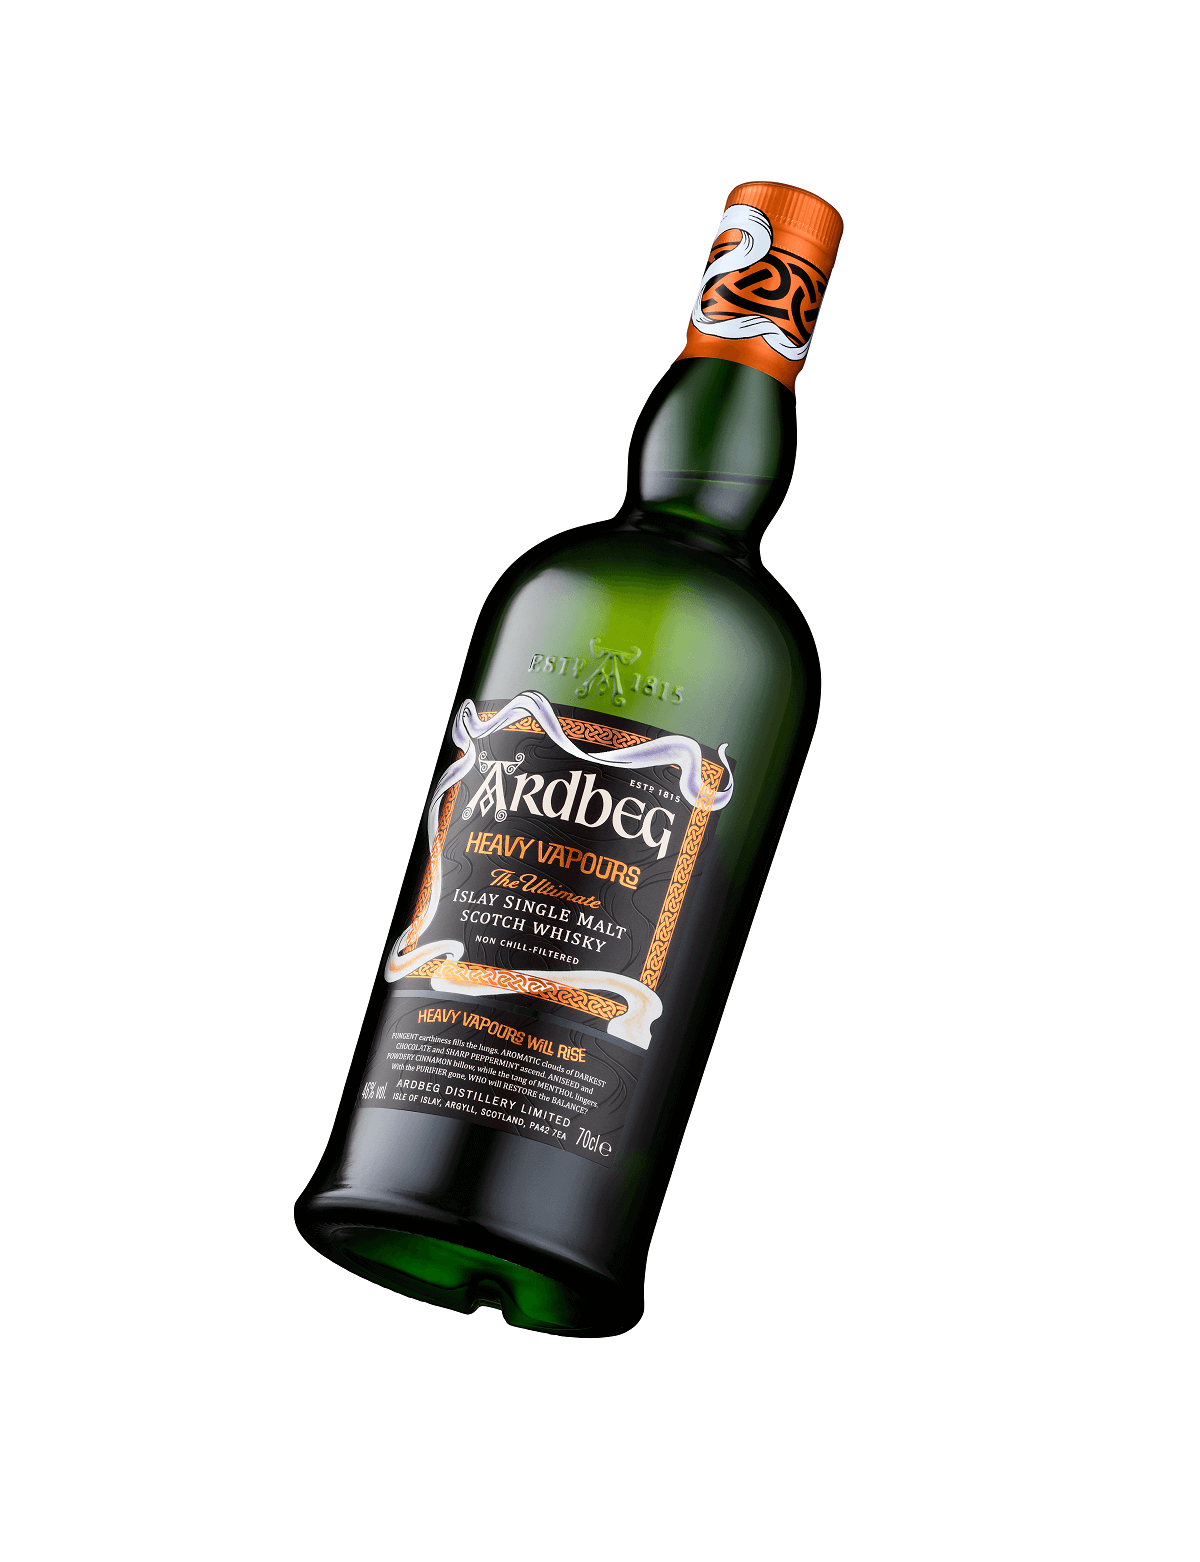 Ardbeg Limited Edition Heavy Vapours